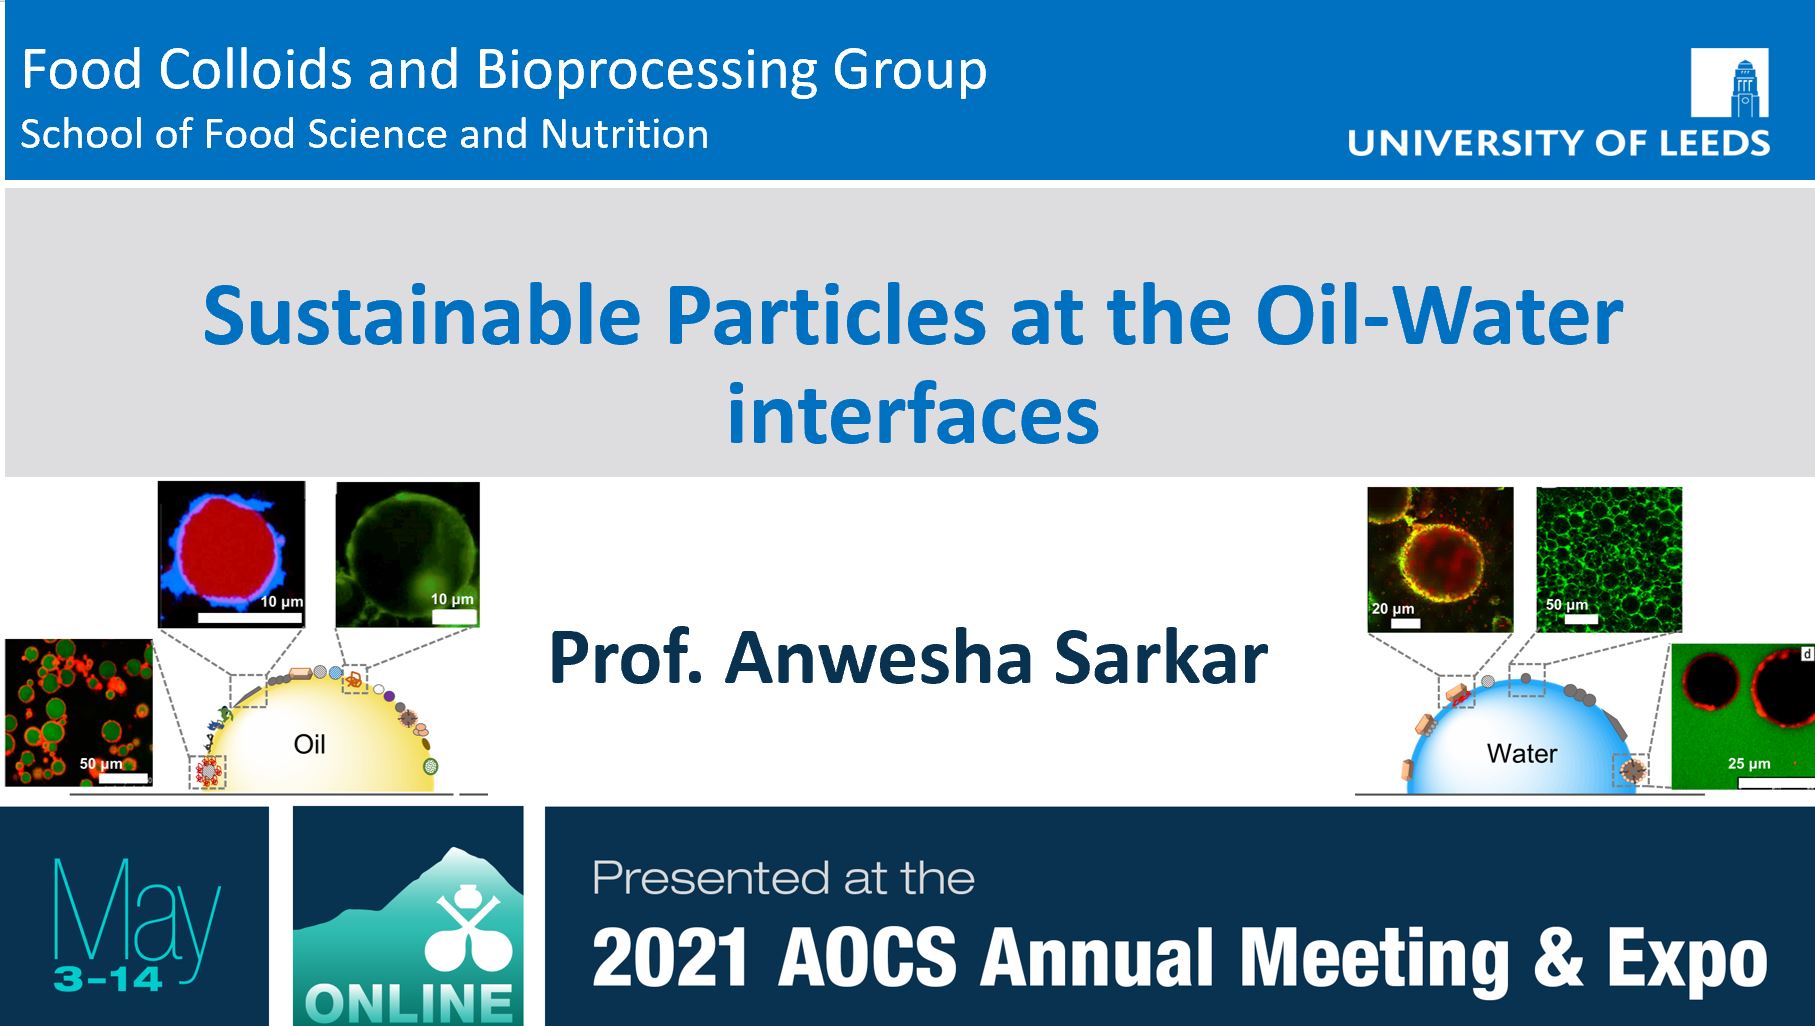 Prof. Sarkar gave a keynote lecture at the 2021 AOCS Annual Meeting & Expo